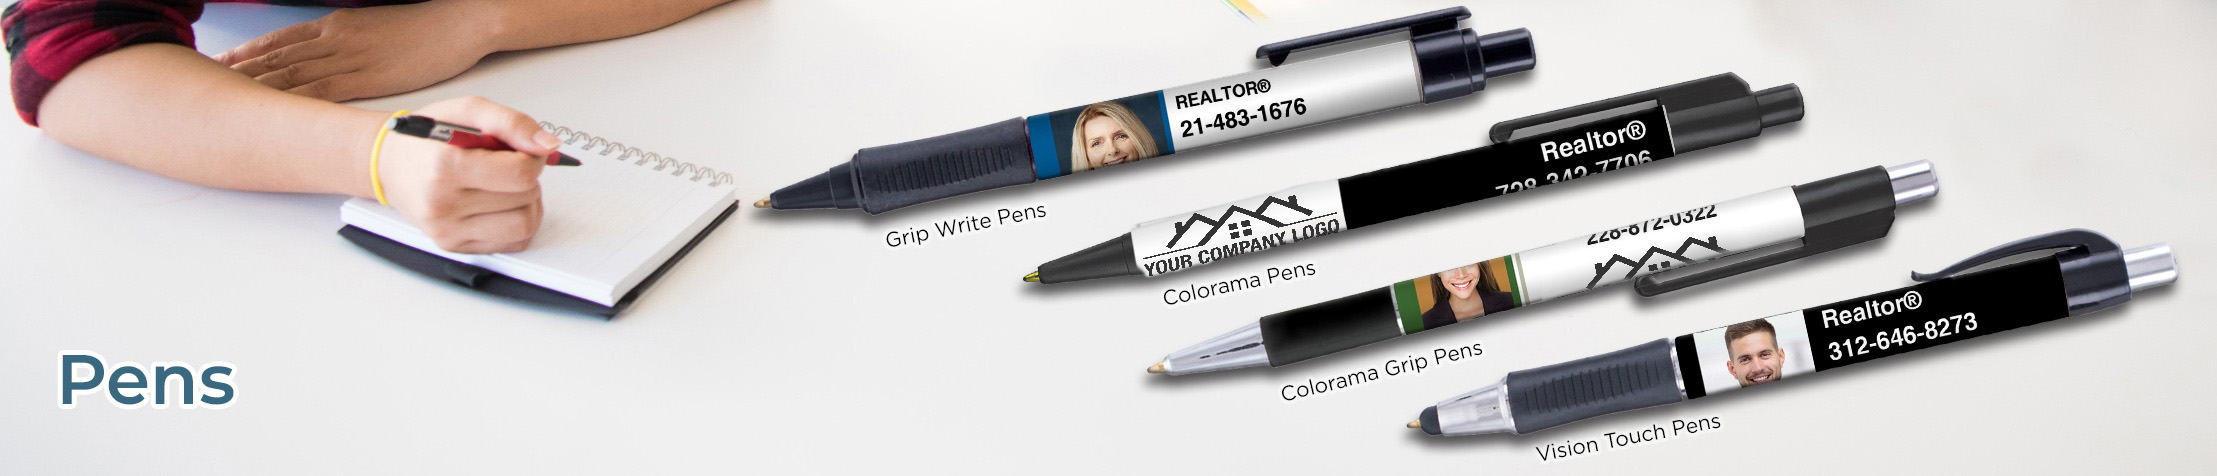 Independent Realtor Real Estate Personalized Pens - promotional products: Grip Write Pens, Colorama Pens, Vision Touch Pens, and Colorama Grip Pens | BestPrintBuy.com